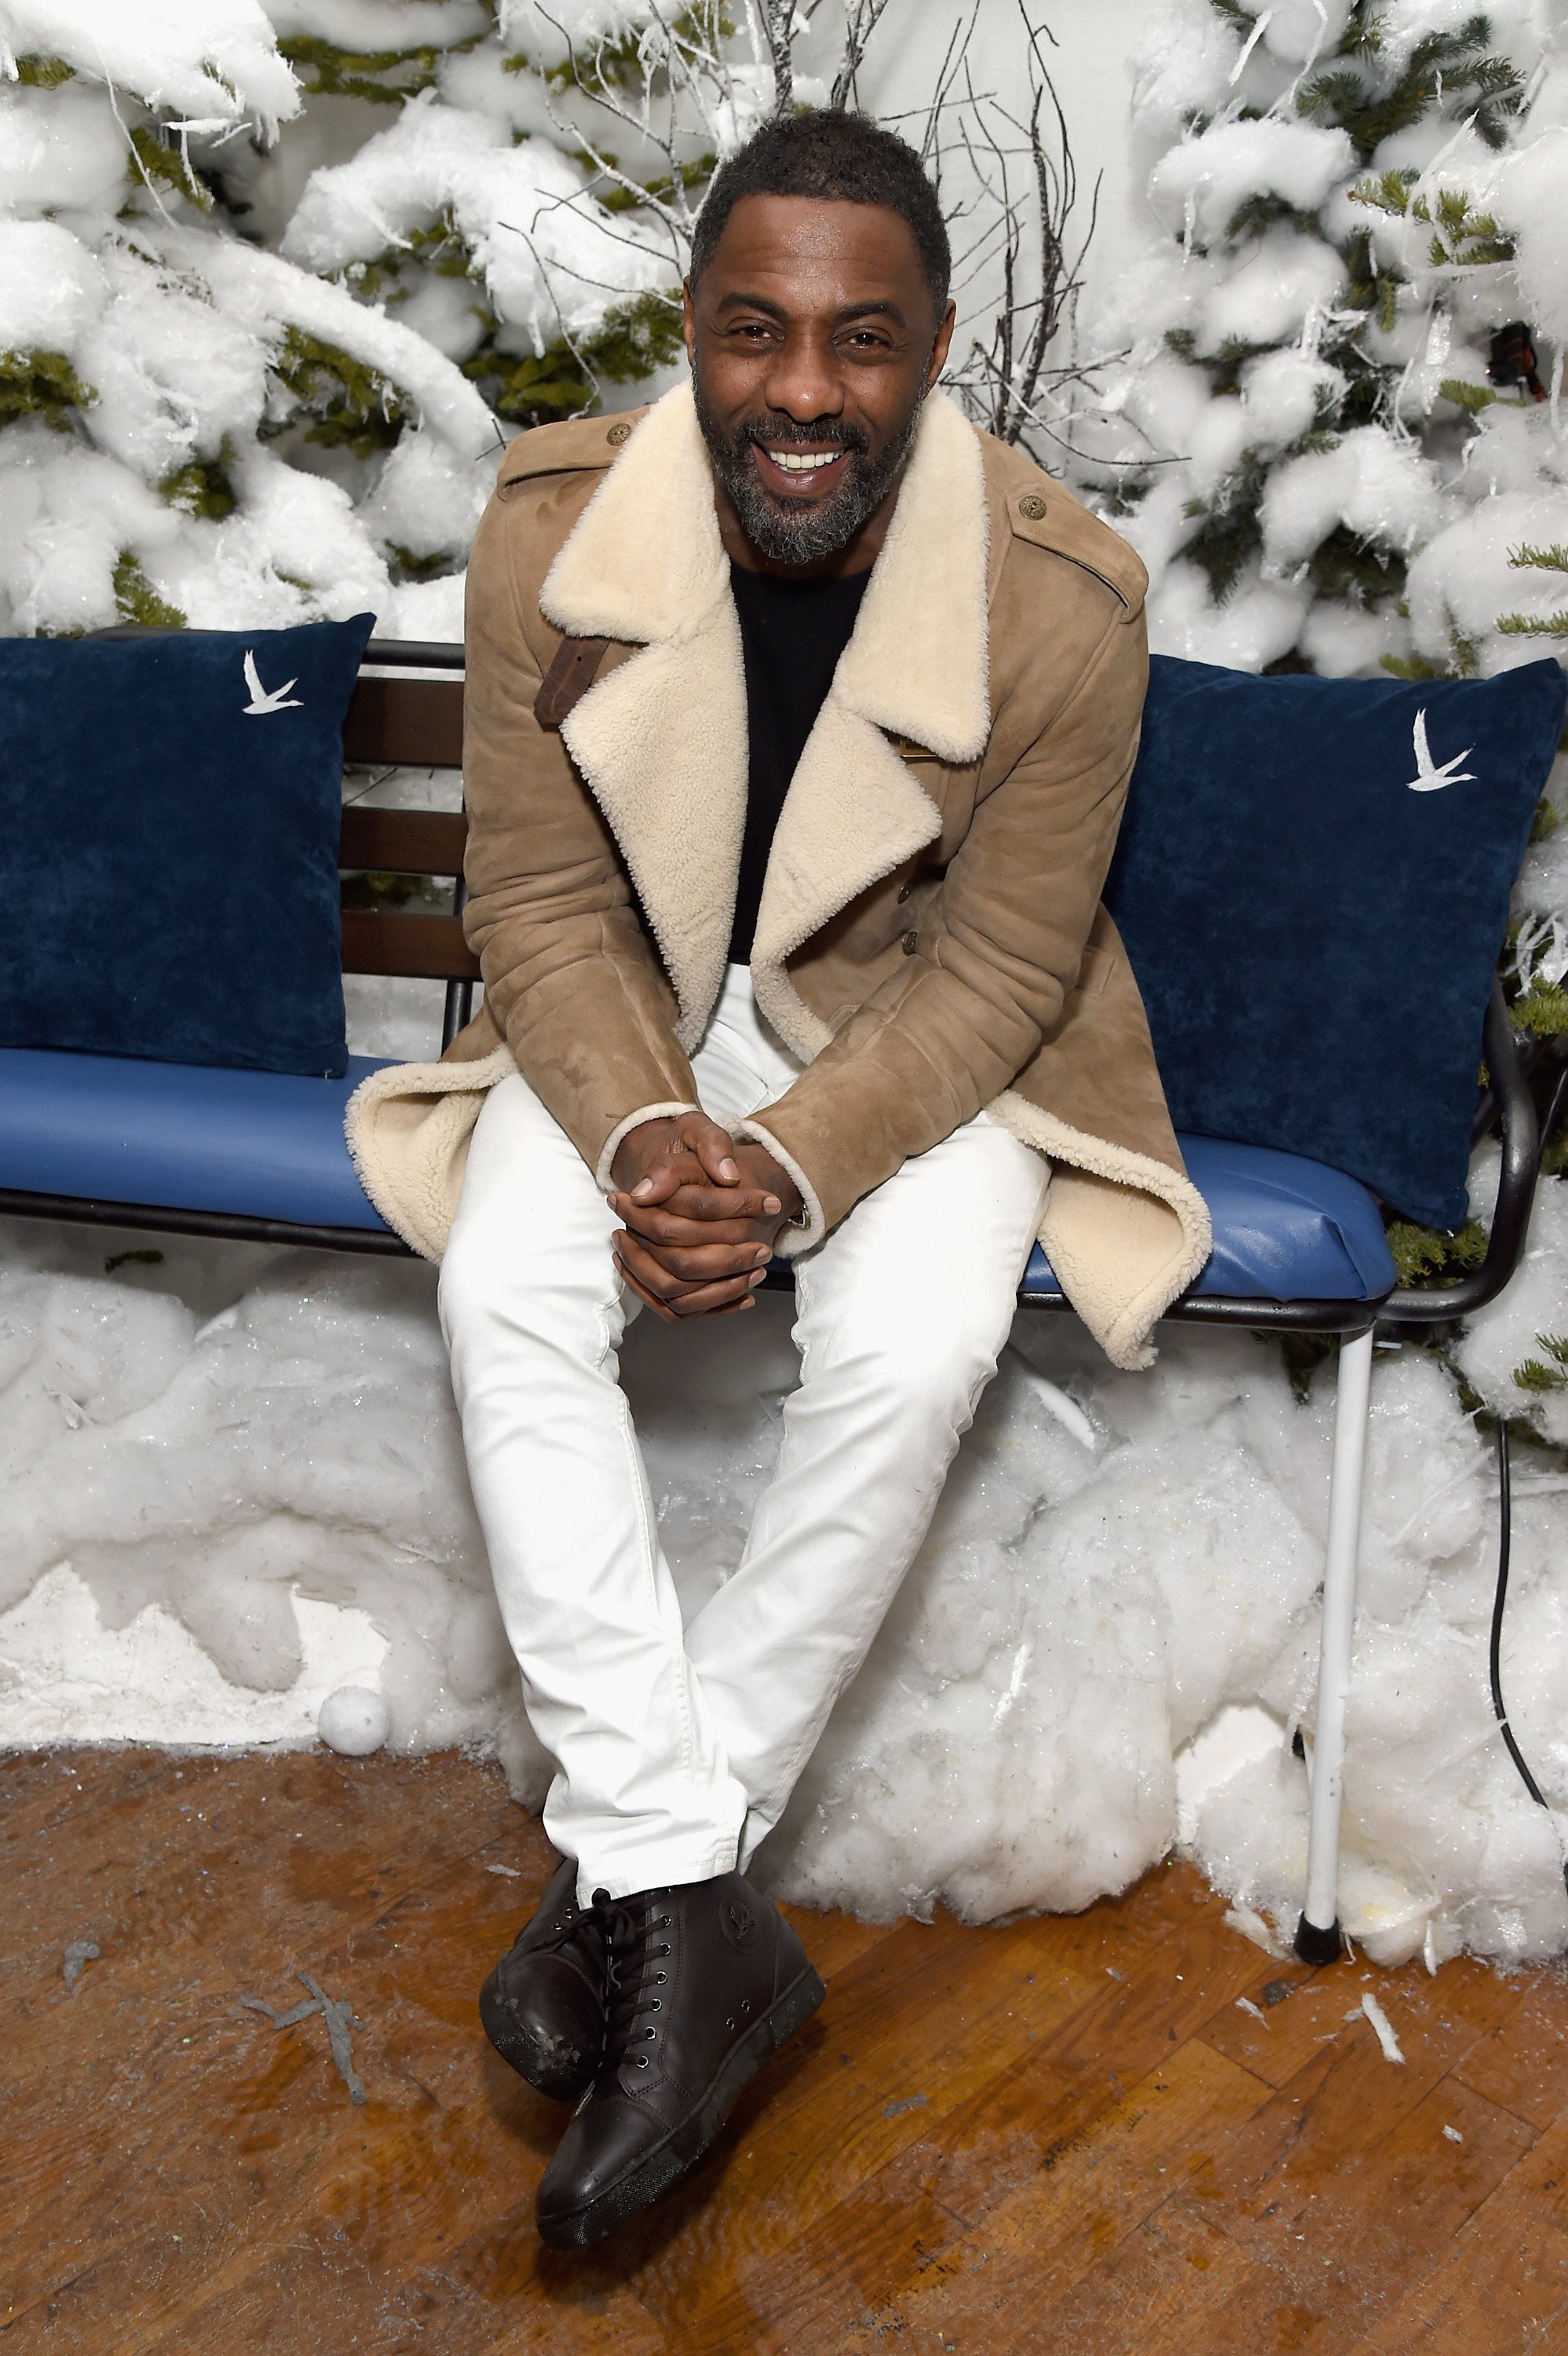 Idris Elba attends the "Yardie" After Party at the Sundance Film Festival on January 20, 2018, in Park City, Utah. | Source: Getty Images.